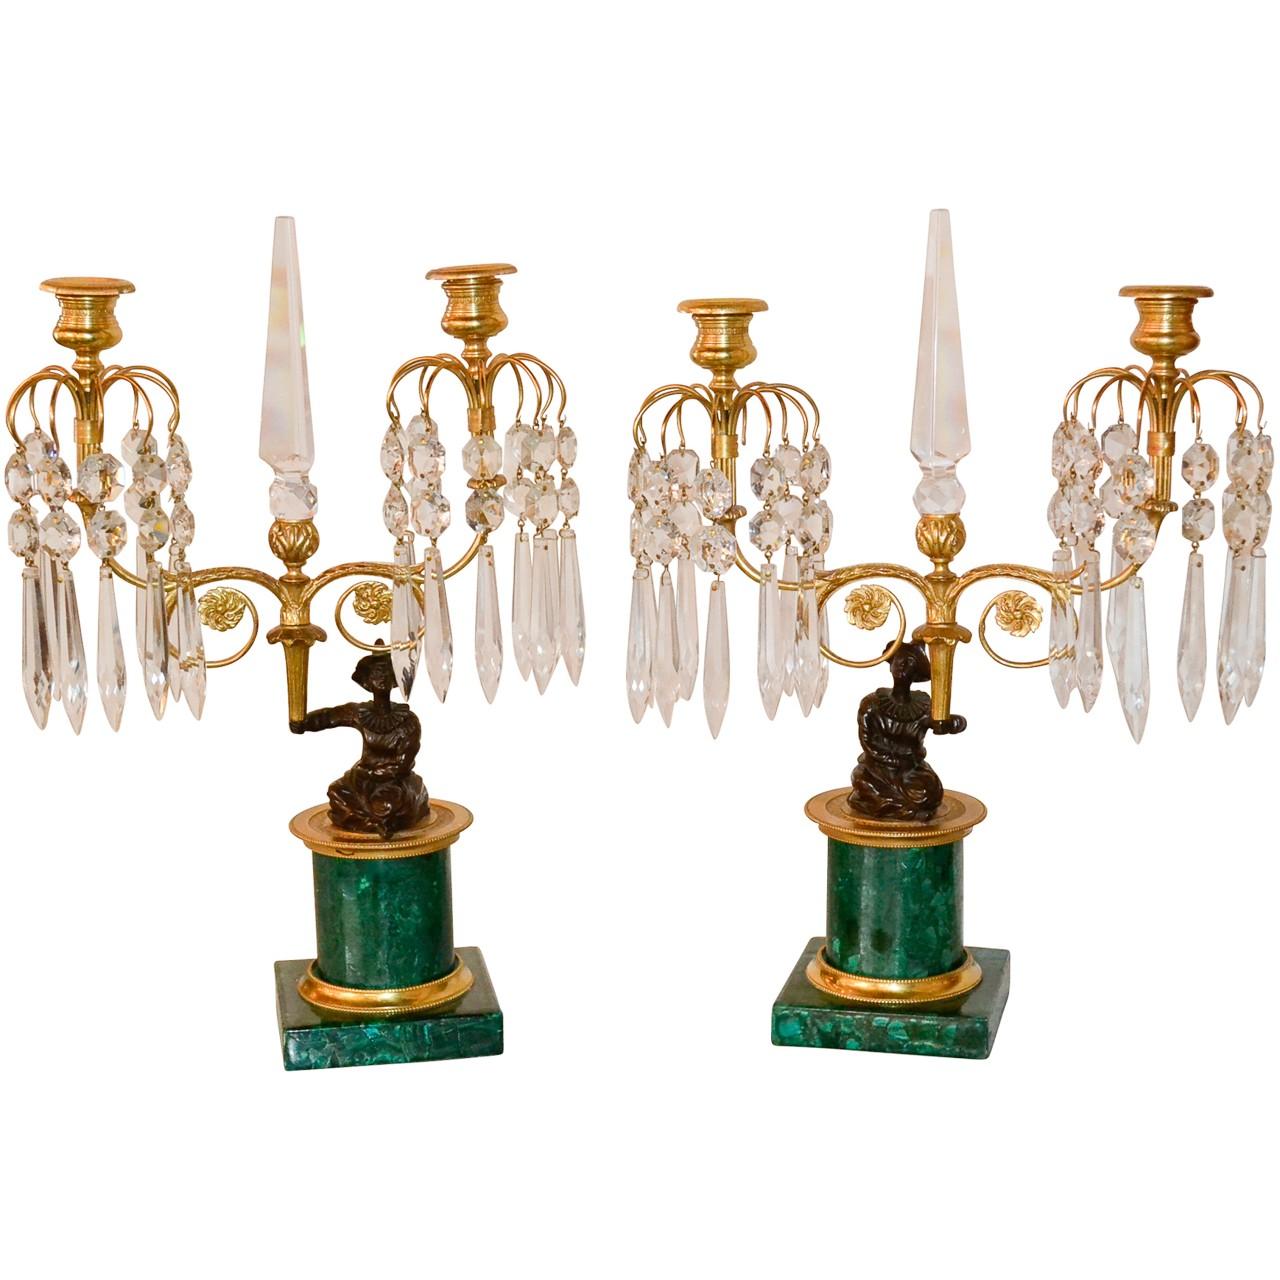 19th Century Pair of French Figural Candelabras